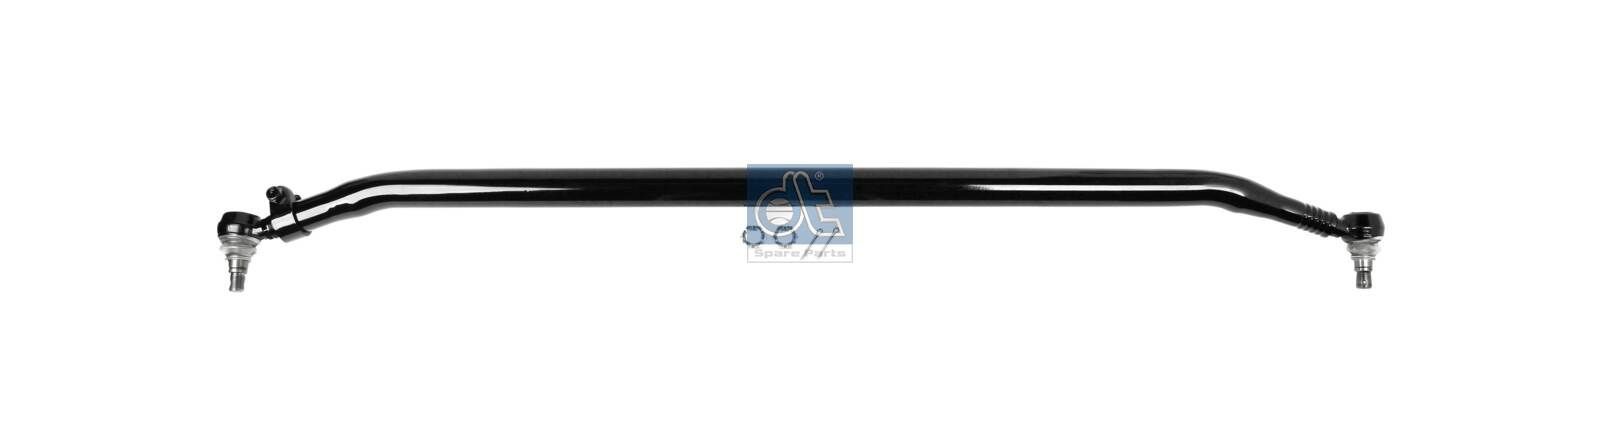 DT Spare Parts 6.53013 Rod Assembly 5010600822